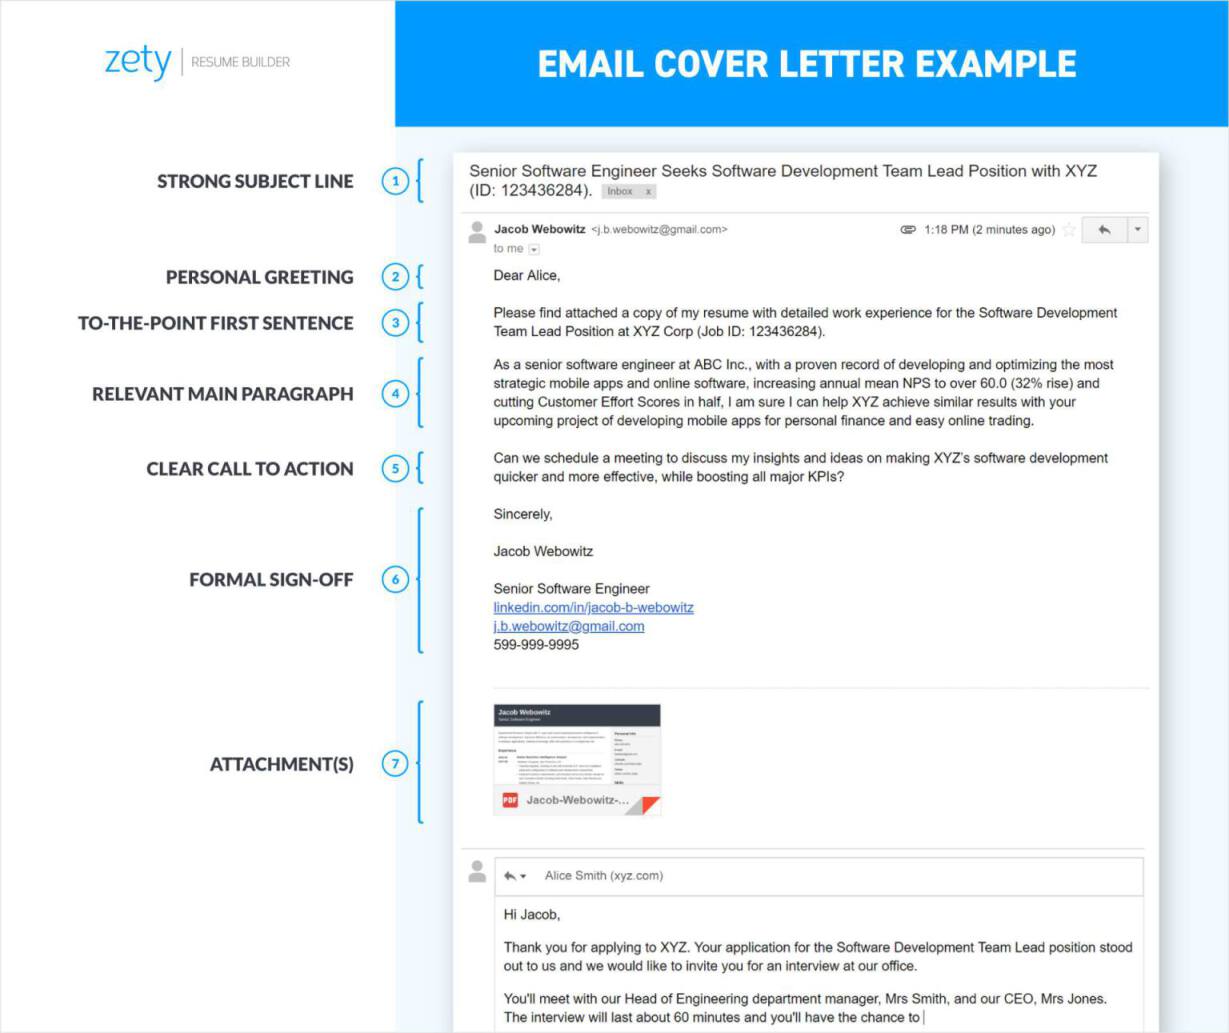 How to write an email cover letter for job application